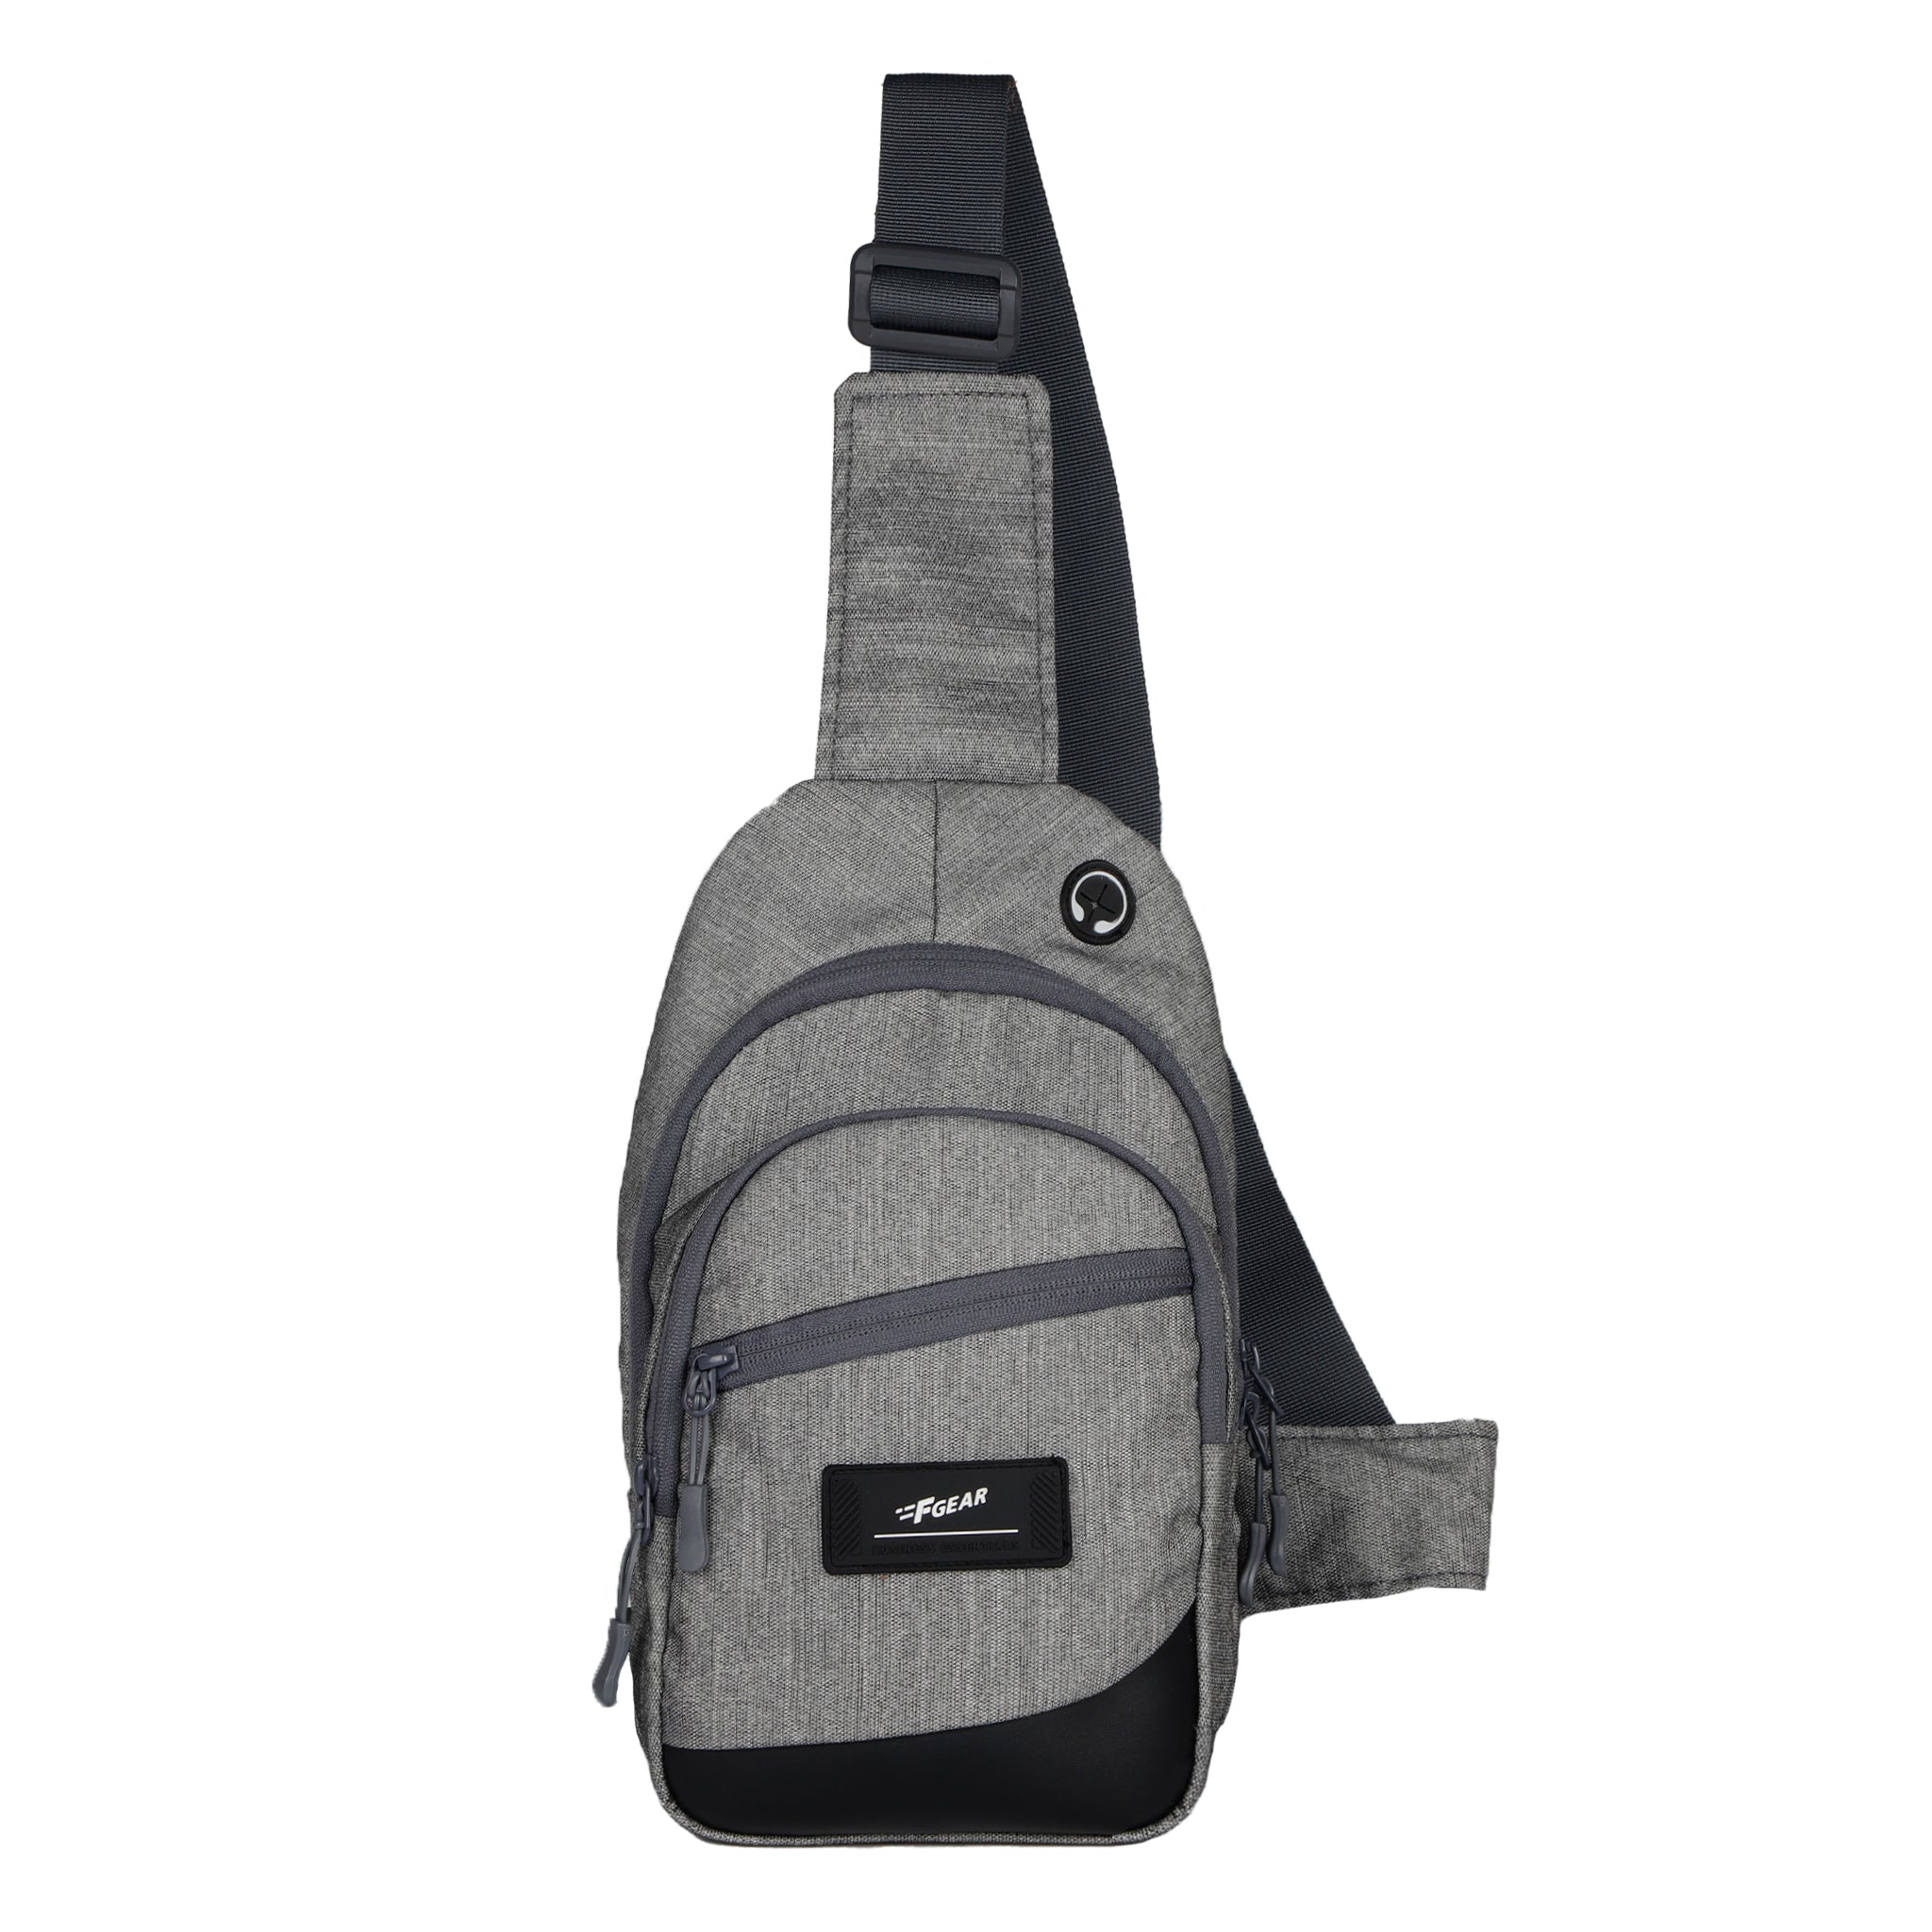 Golden Farma Black And Grey Color Laptop Bag in Rampur at best price by K  Kanayalal & Sons - Justdial